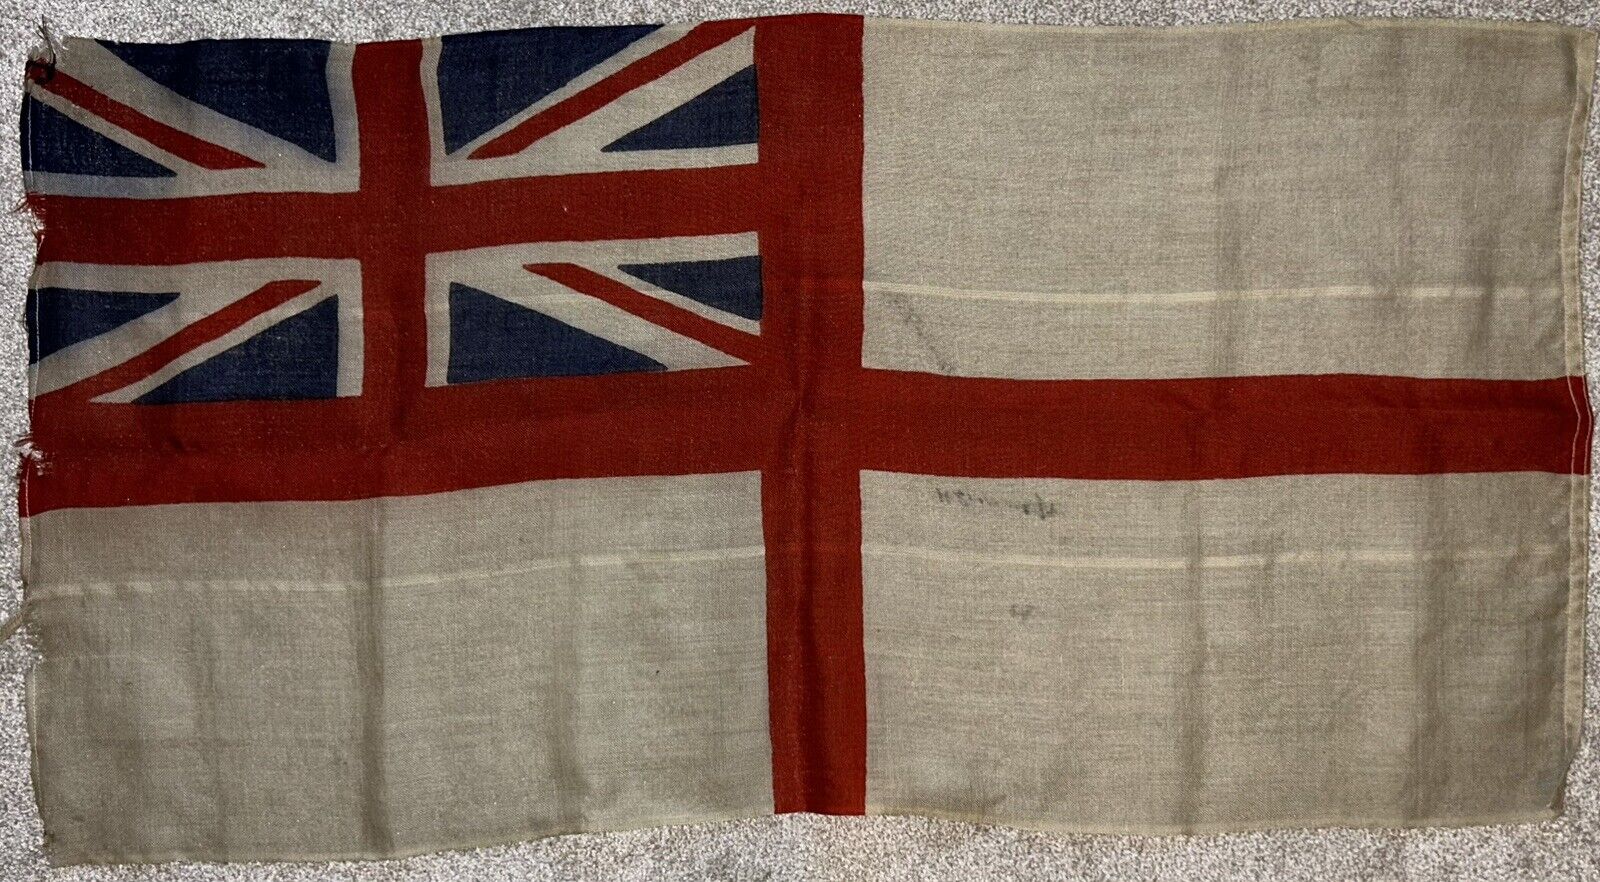 An Antique Wool/Linen Weave Naval White Ensign British Flag Ship Or Boat Cyprus